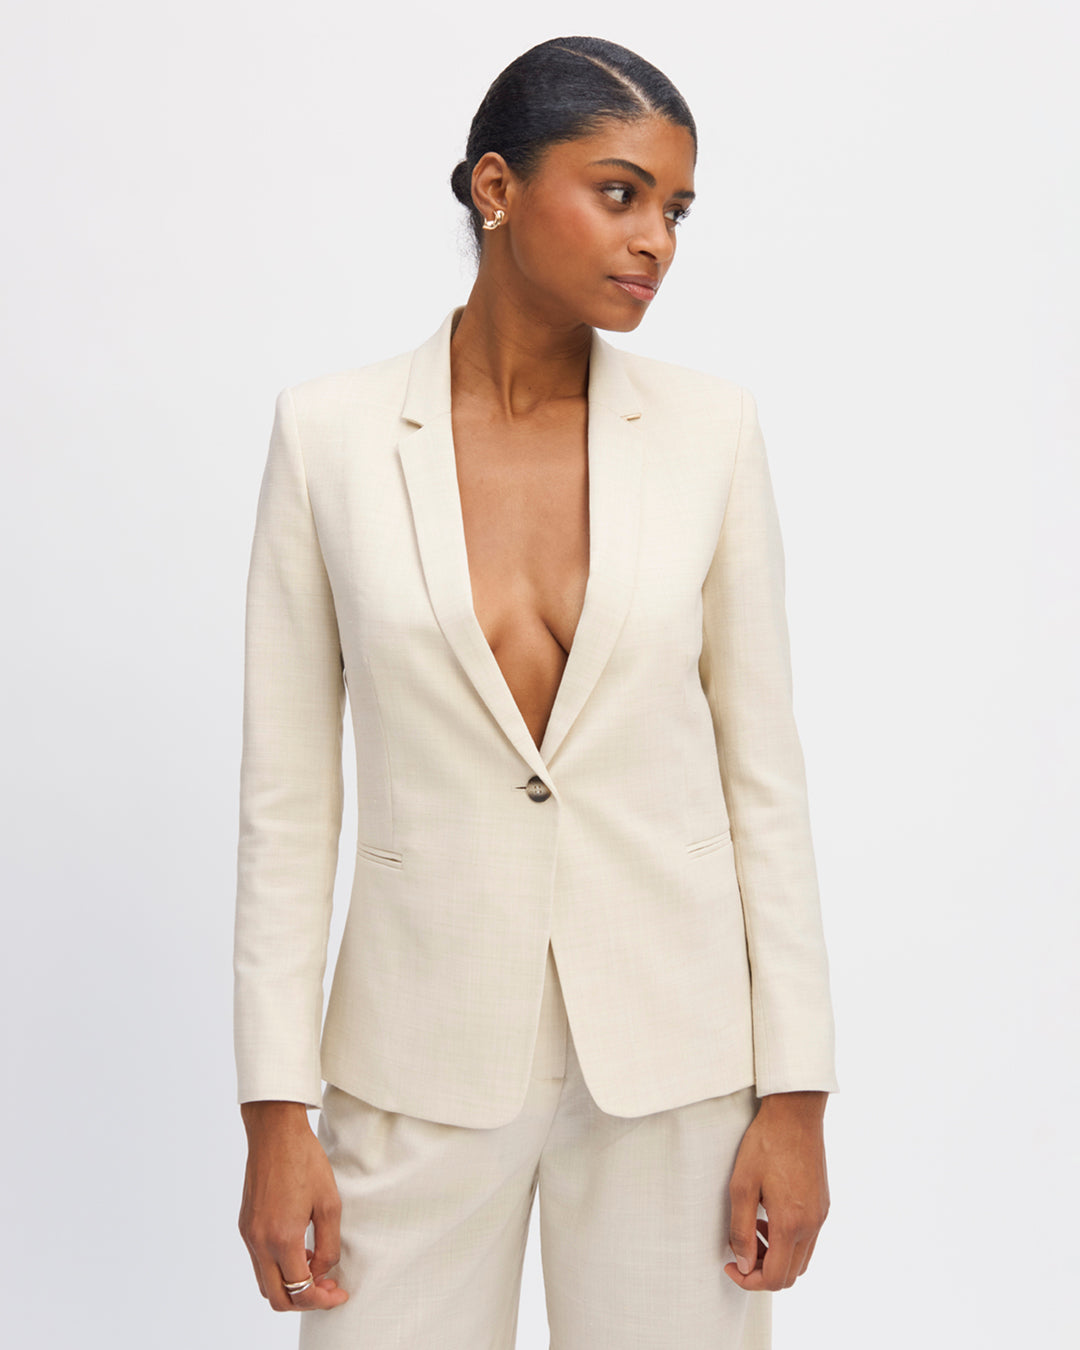 women's-suit-curved-buttoned-pocketed-breasted-inside-low-sleeve-lined-17H10-women's-suit-paris-